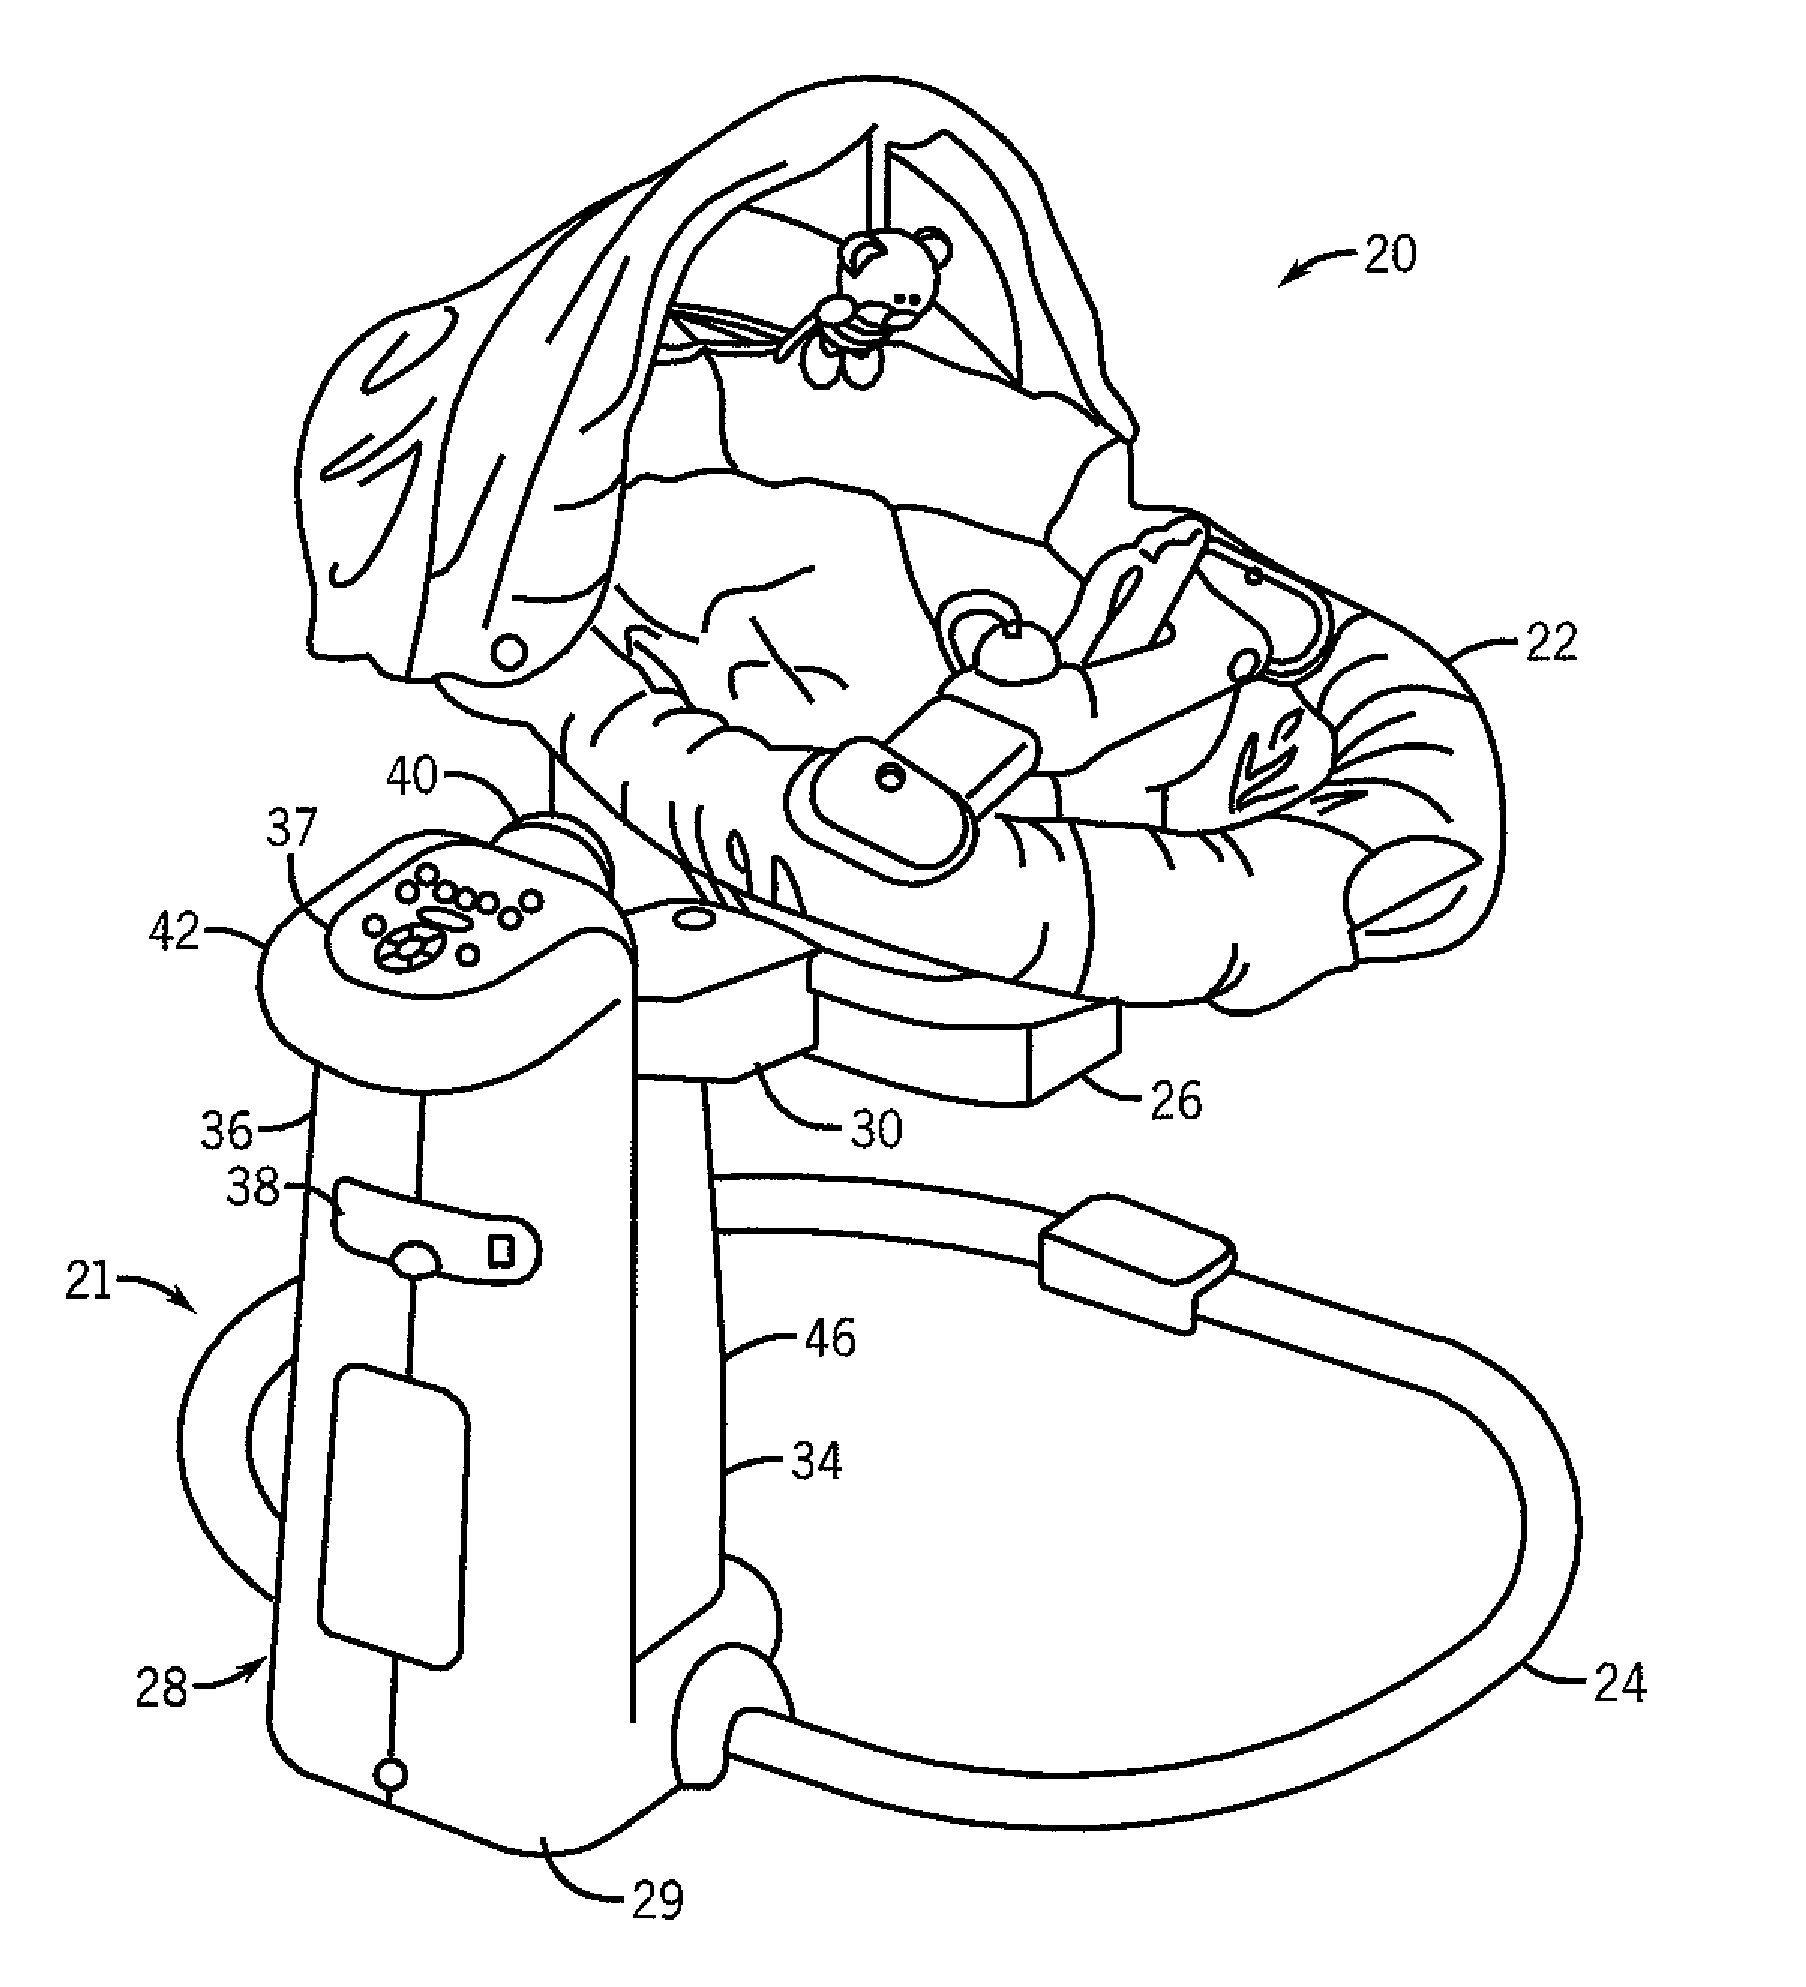 Child soothing device with a low frequency sound chamber